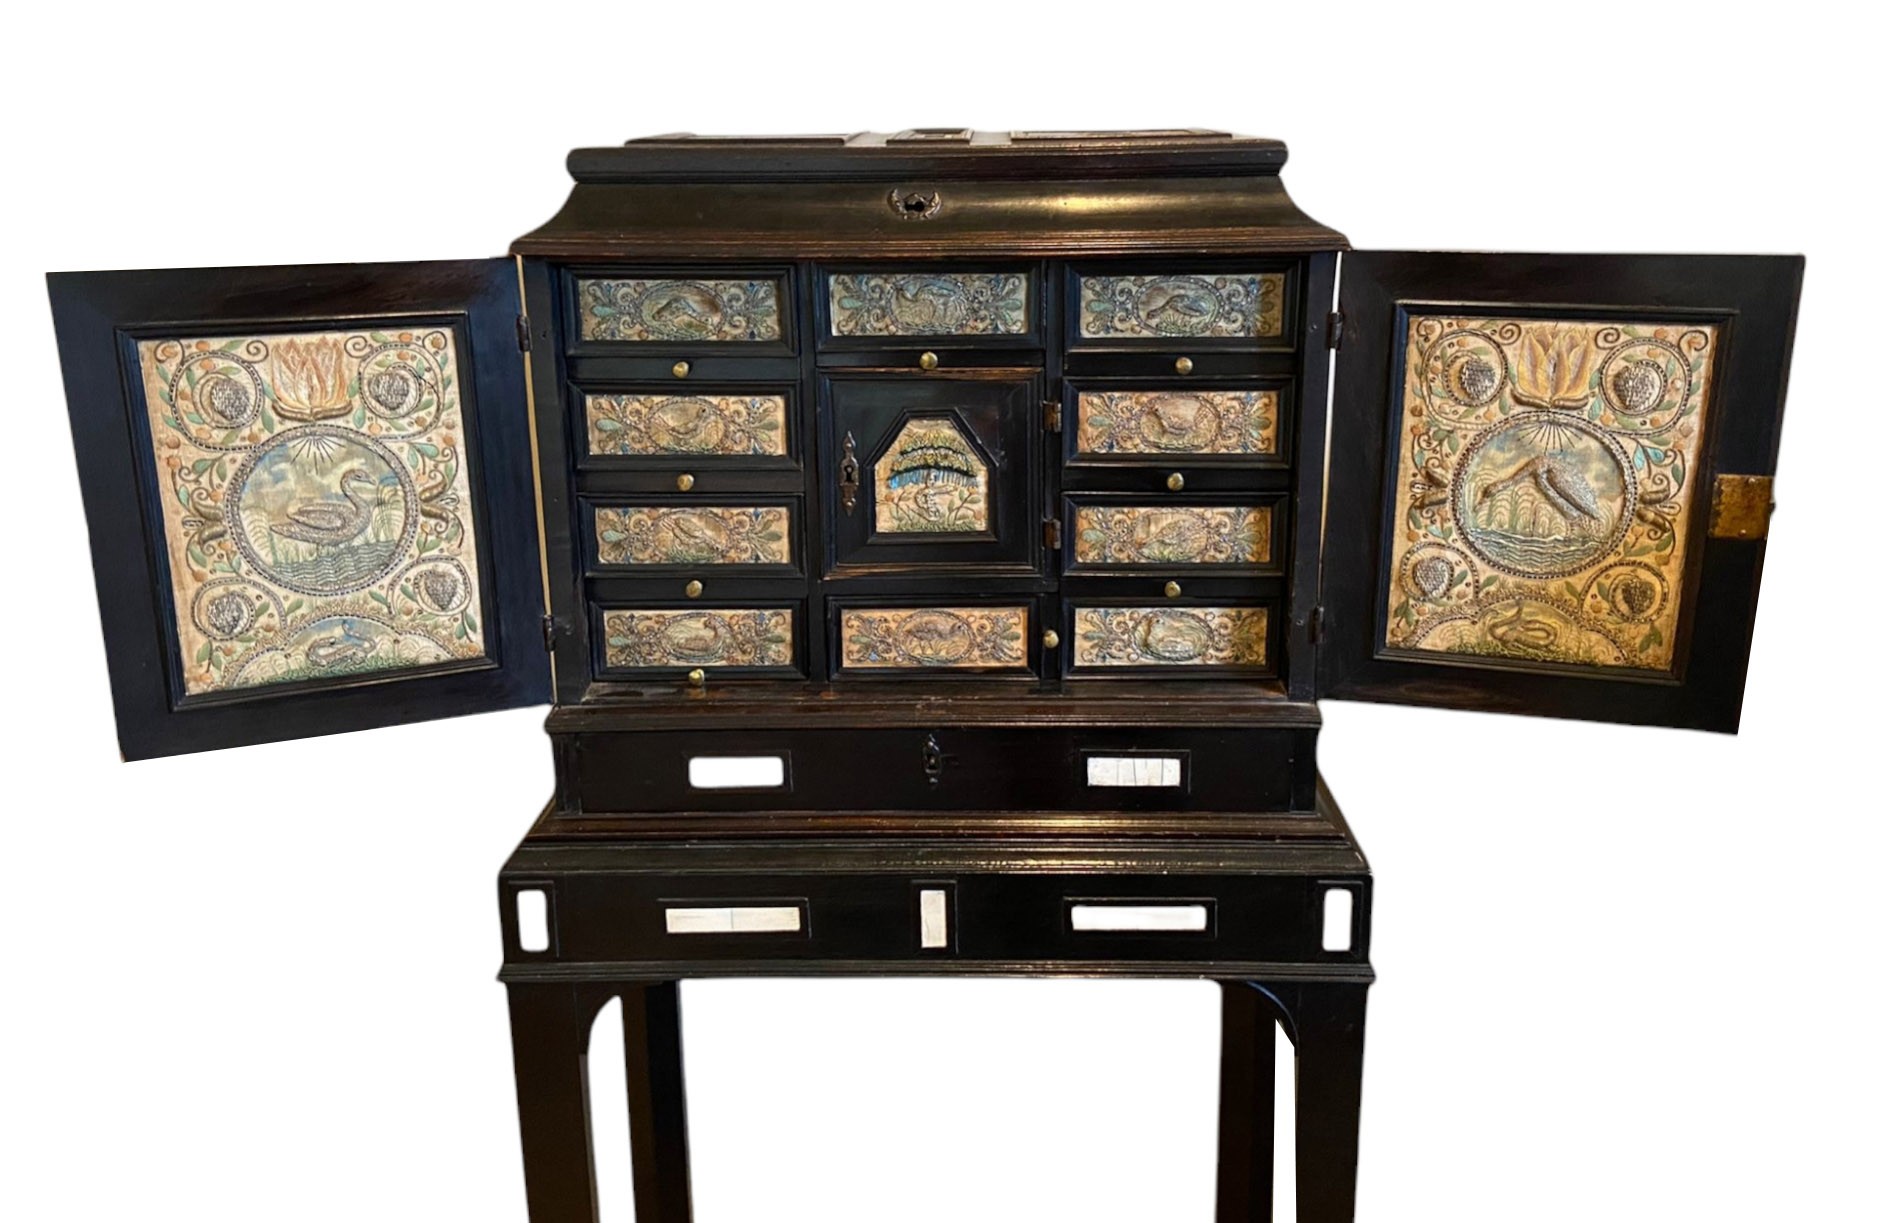 A RARE 17TH CENTURY EBONY IVORY AND EMBROIDERED RAISED WORK ANTWERP CABINET ON STAND The rise and - Image 3 of 12